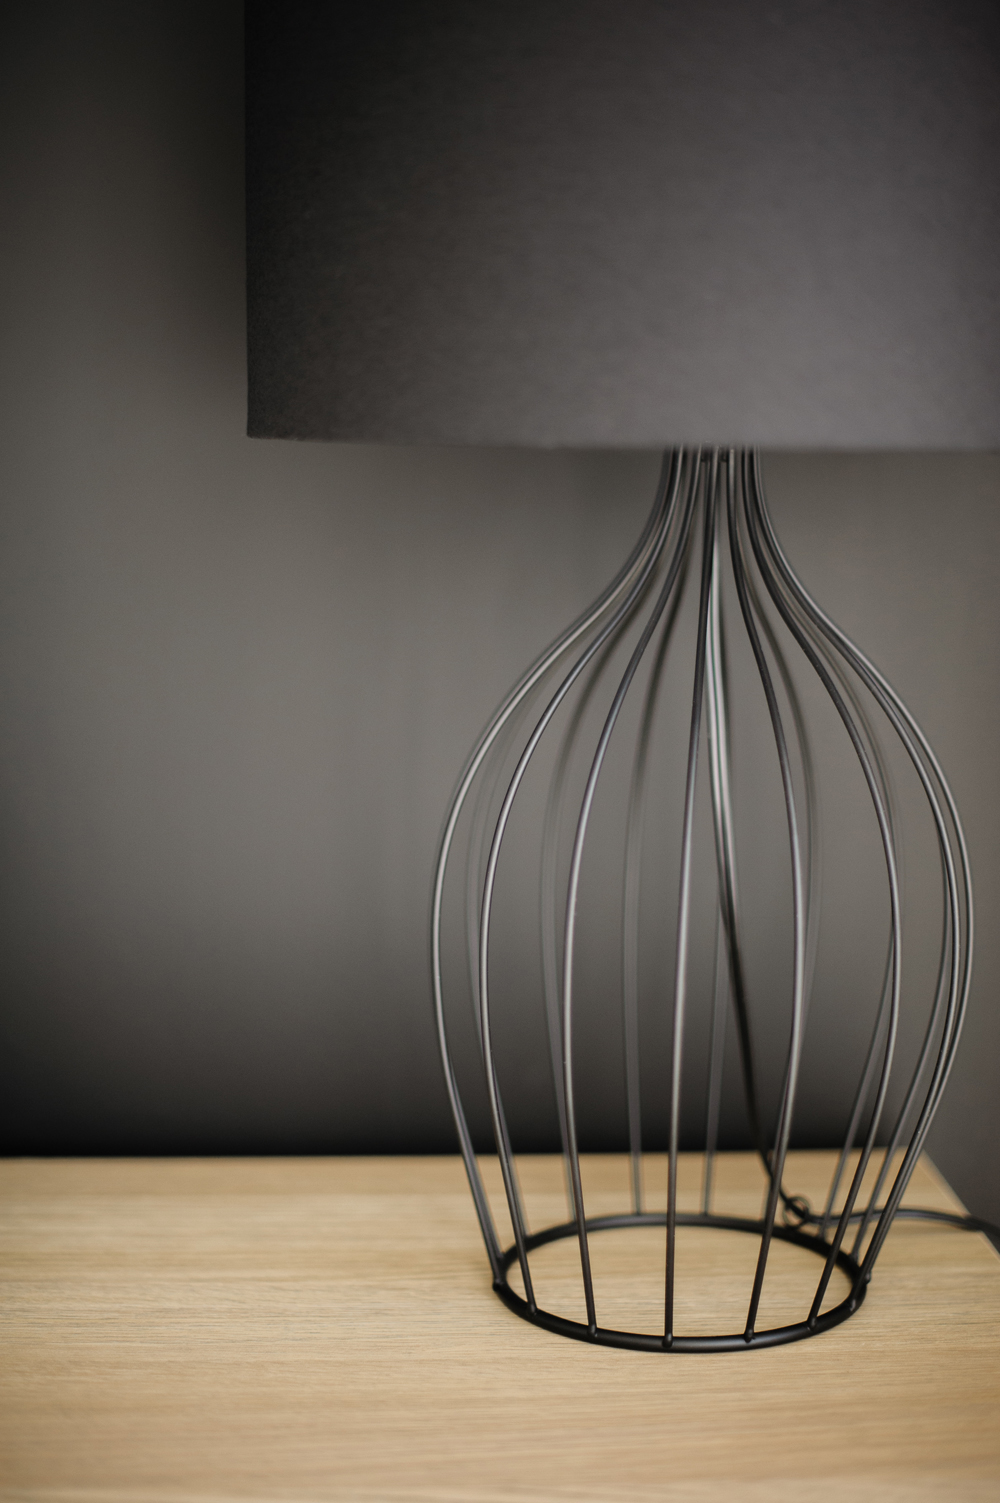 Black wire table lamp against a black wall